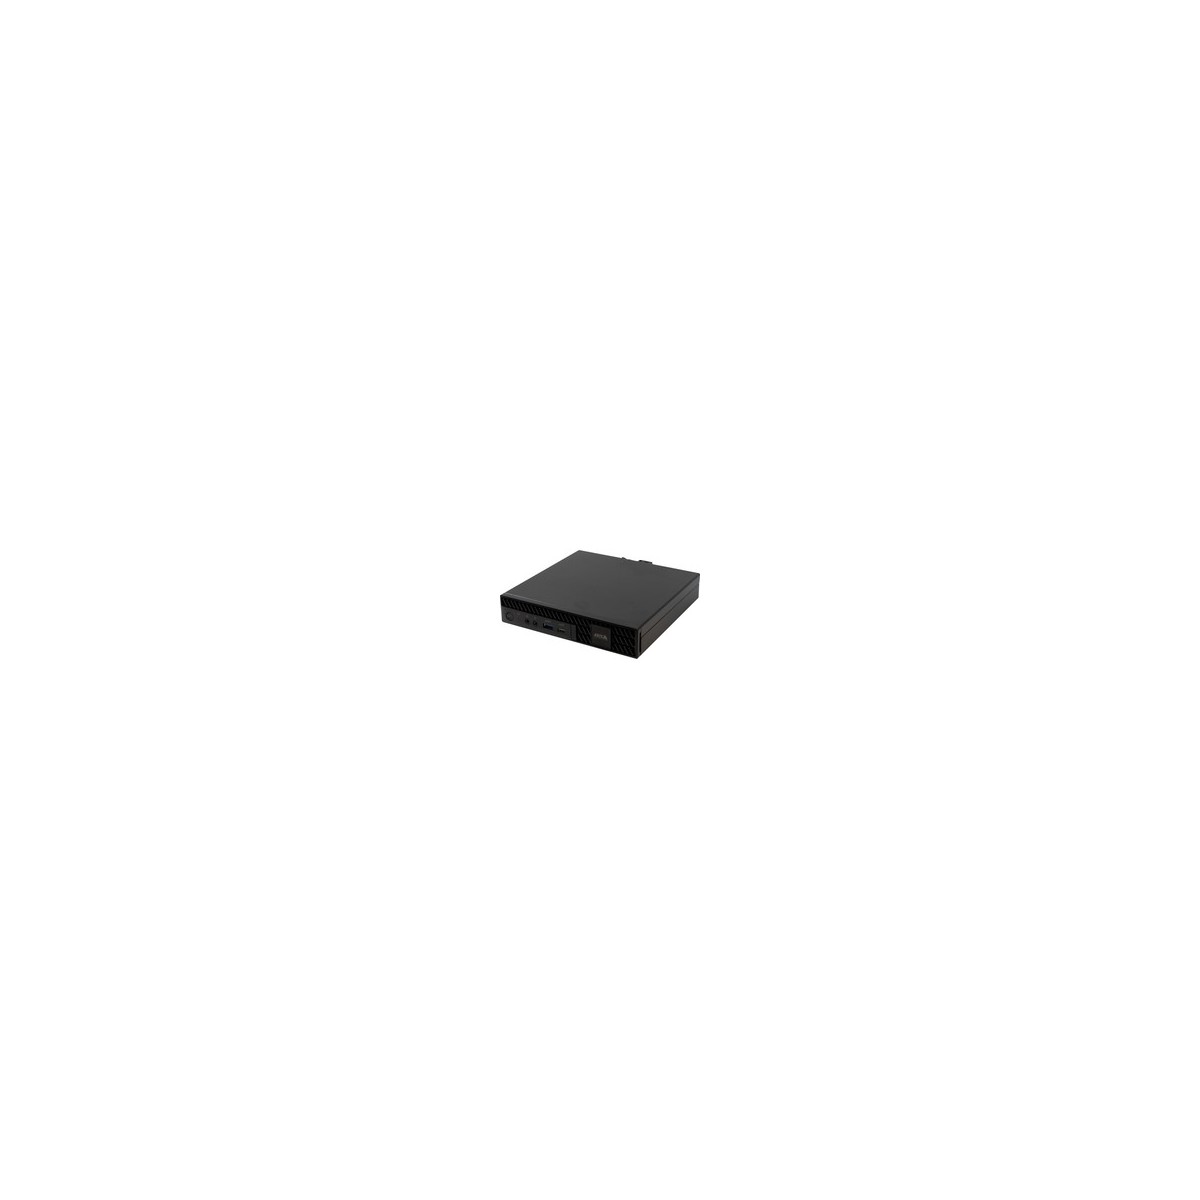 Axis 02693-003 - 1 channels - 36 channels - 8192 MB - Windows 10 IoT Enterprise - Axis - Black